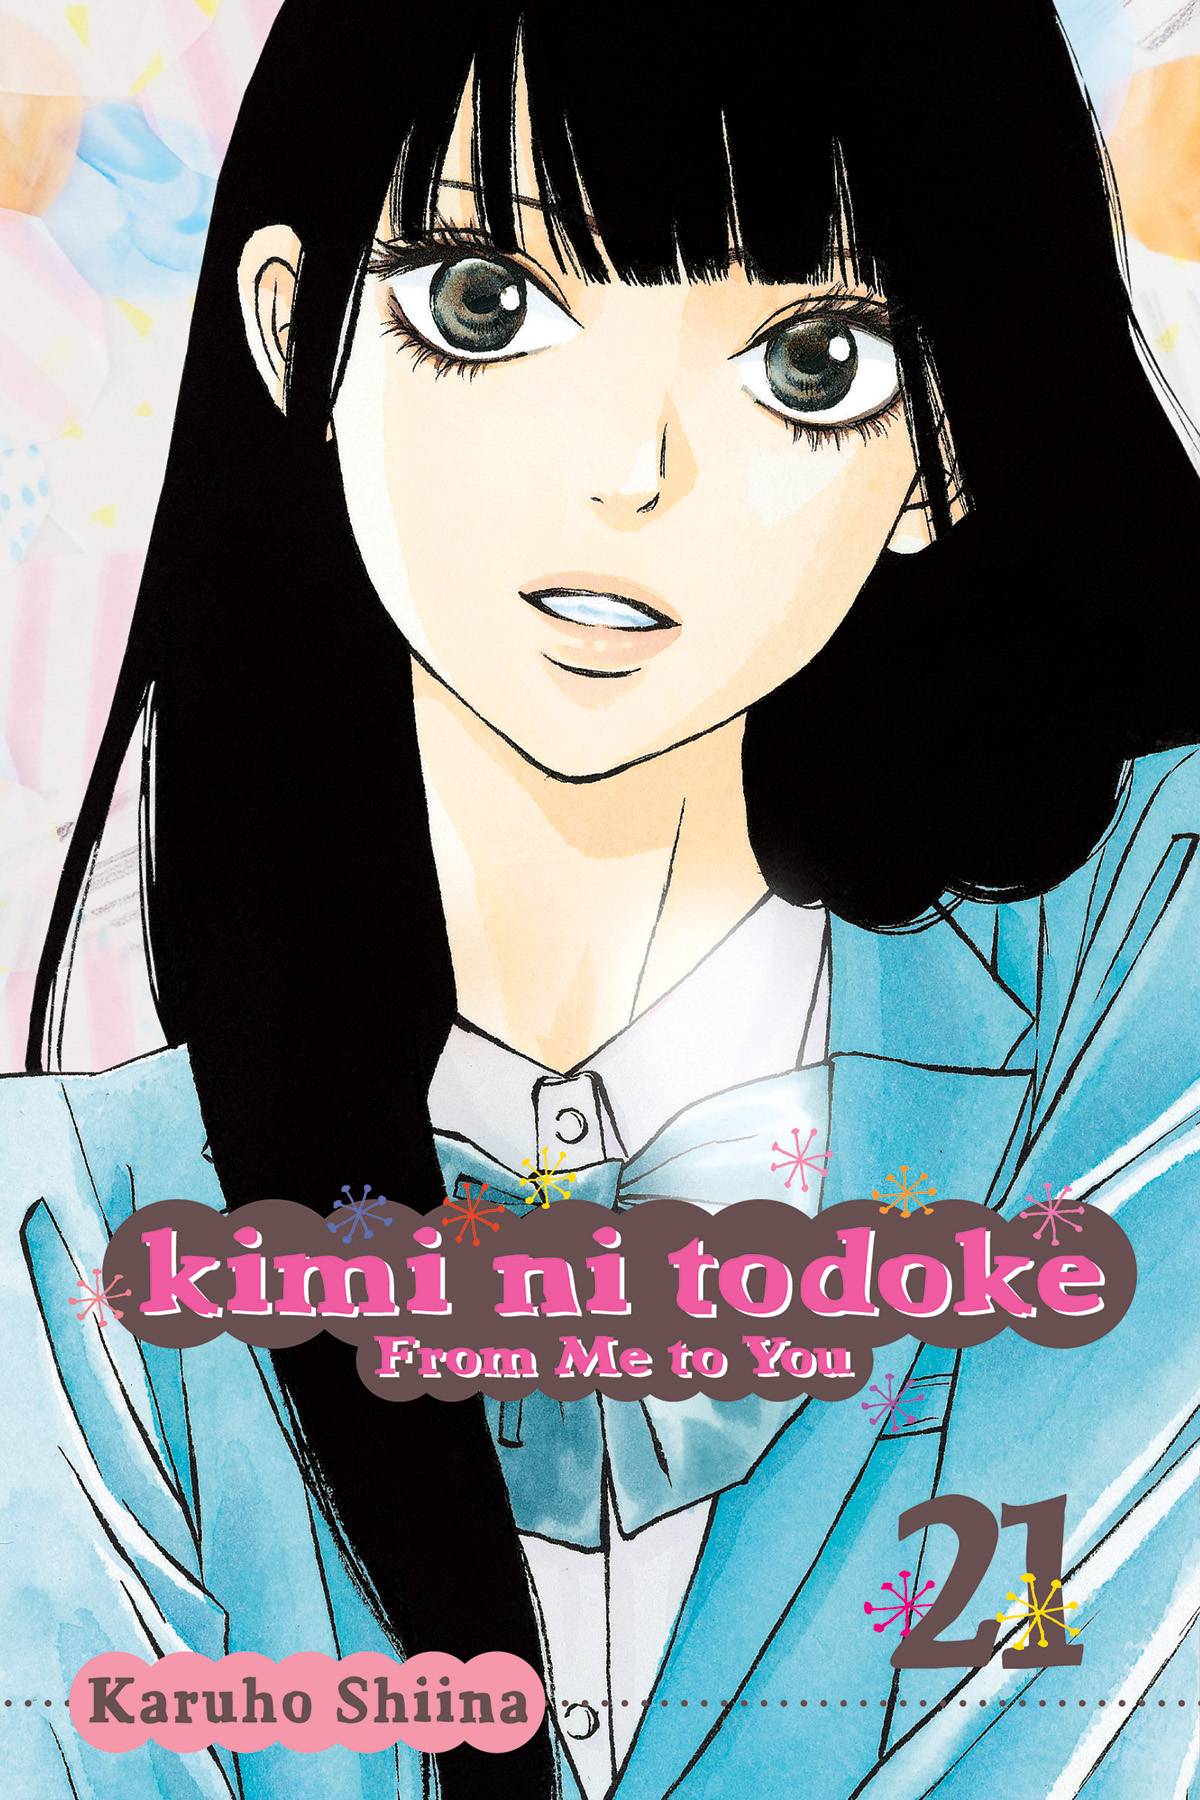 KIMI NI TODOKE GN VOL 21 FROM ME TO YOU